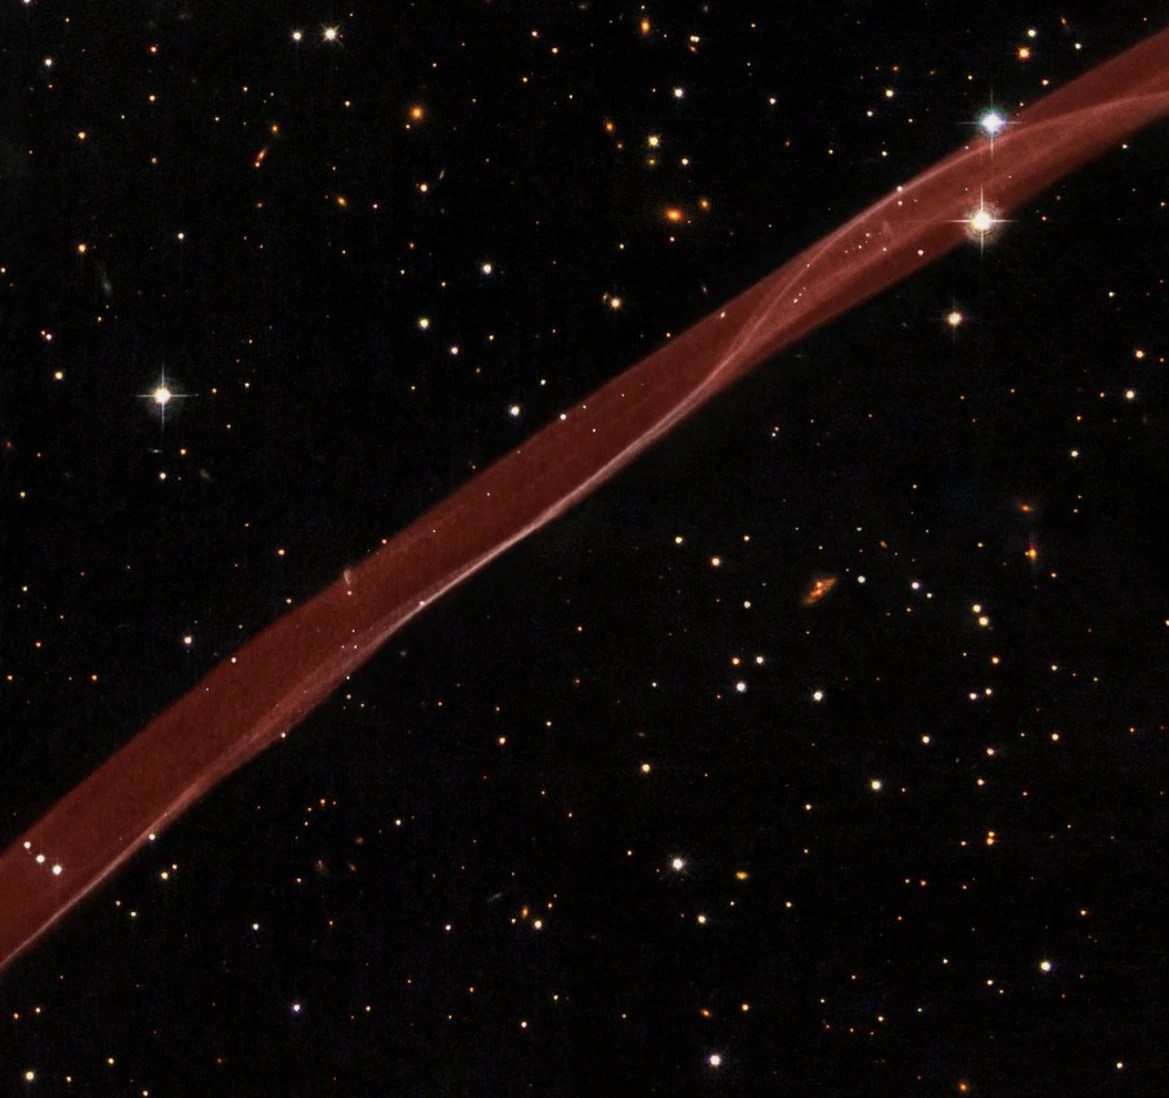 A thin, red ribbon of gas crosses diagonally over the scene. Details in the trail show dimension and twisting of the stream of matter. In the background, black space is dotted with yellow stars and galaxies.